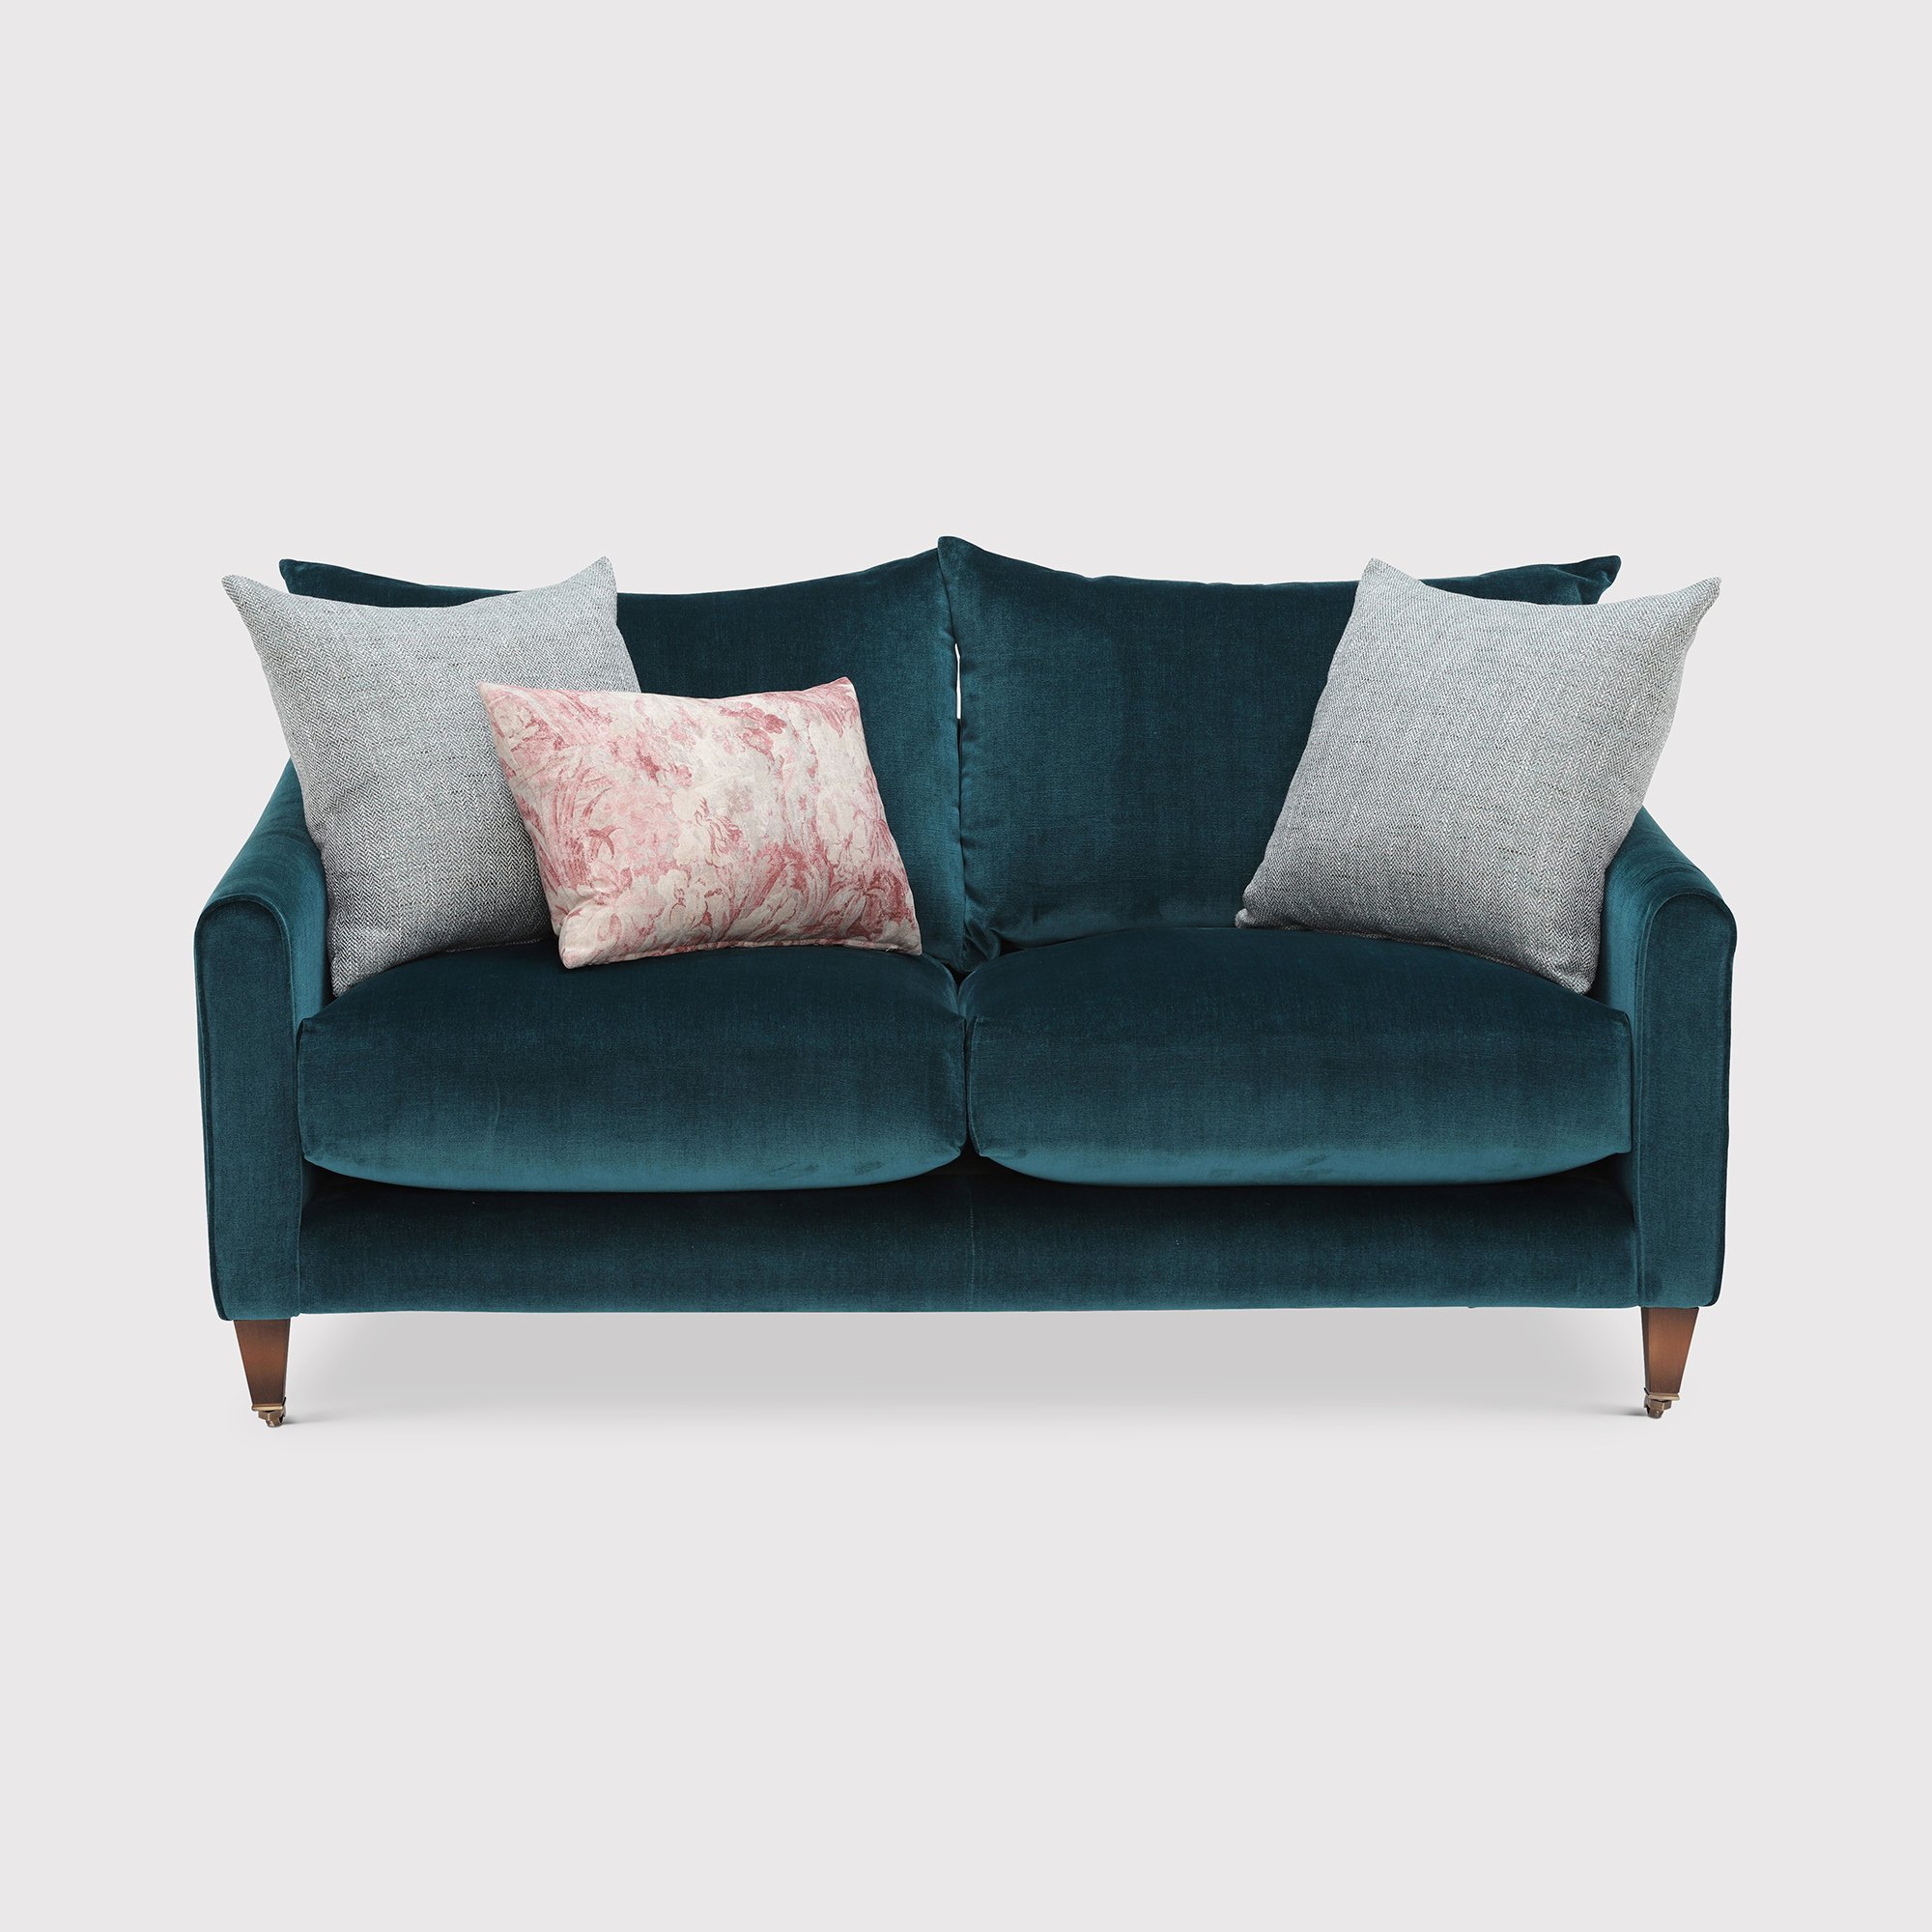 Harling 3 Seater Sofa, Teal Fabric | Barker & Stonehouse